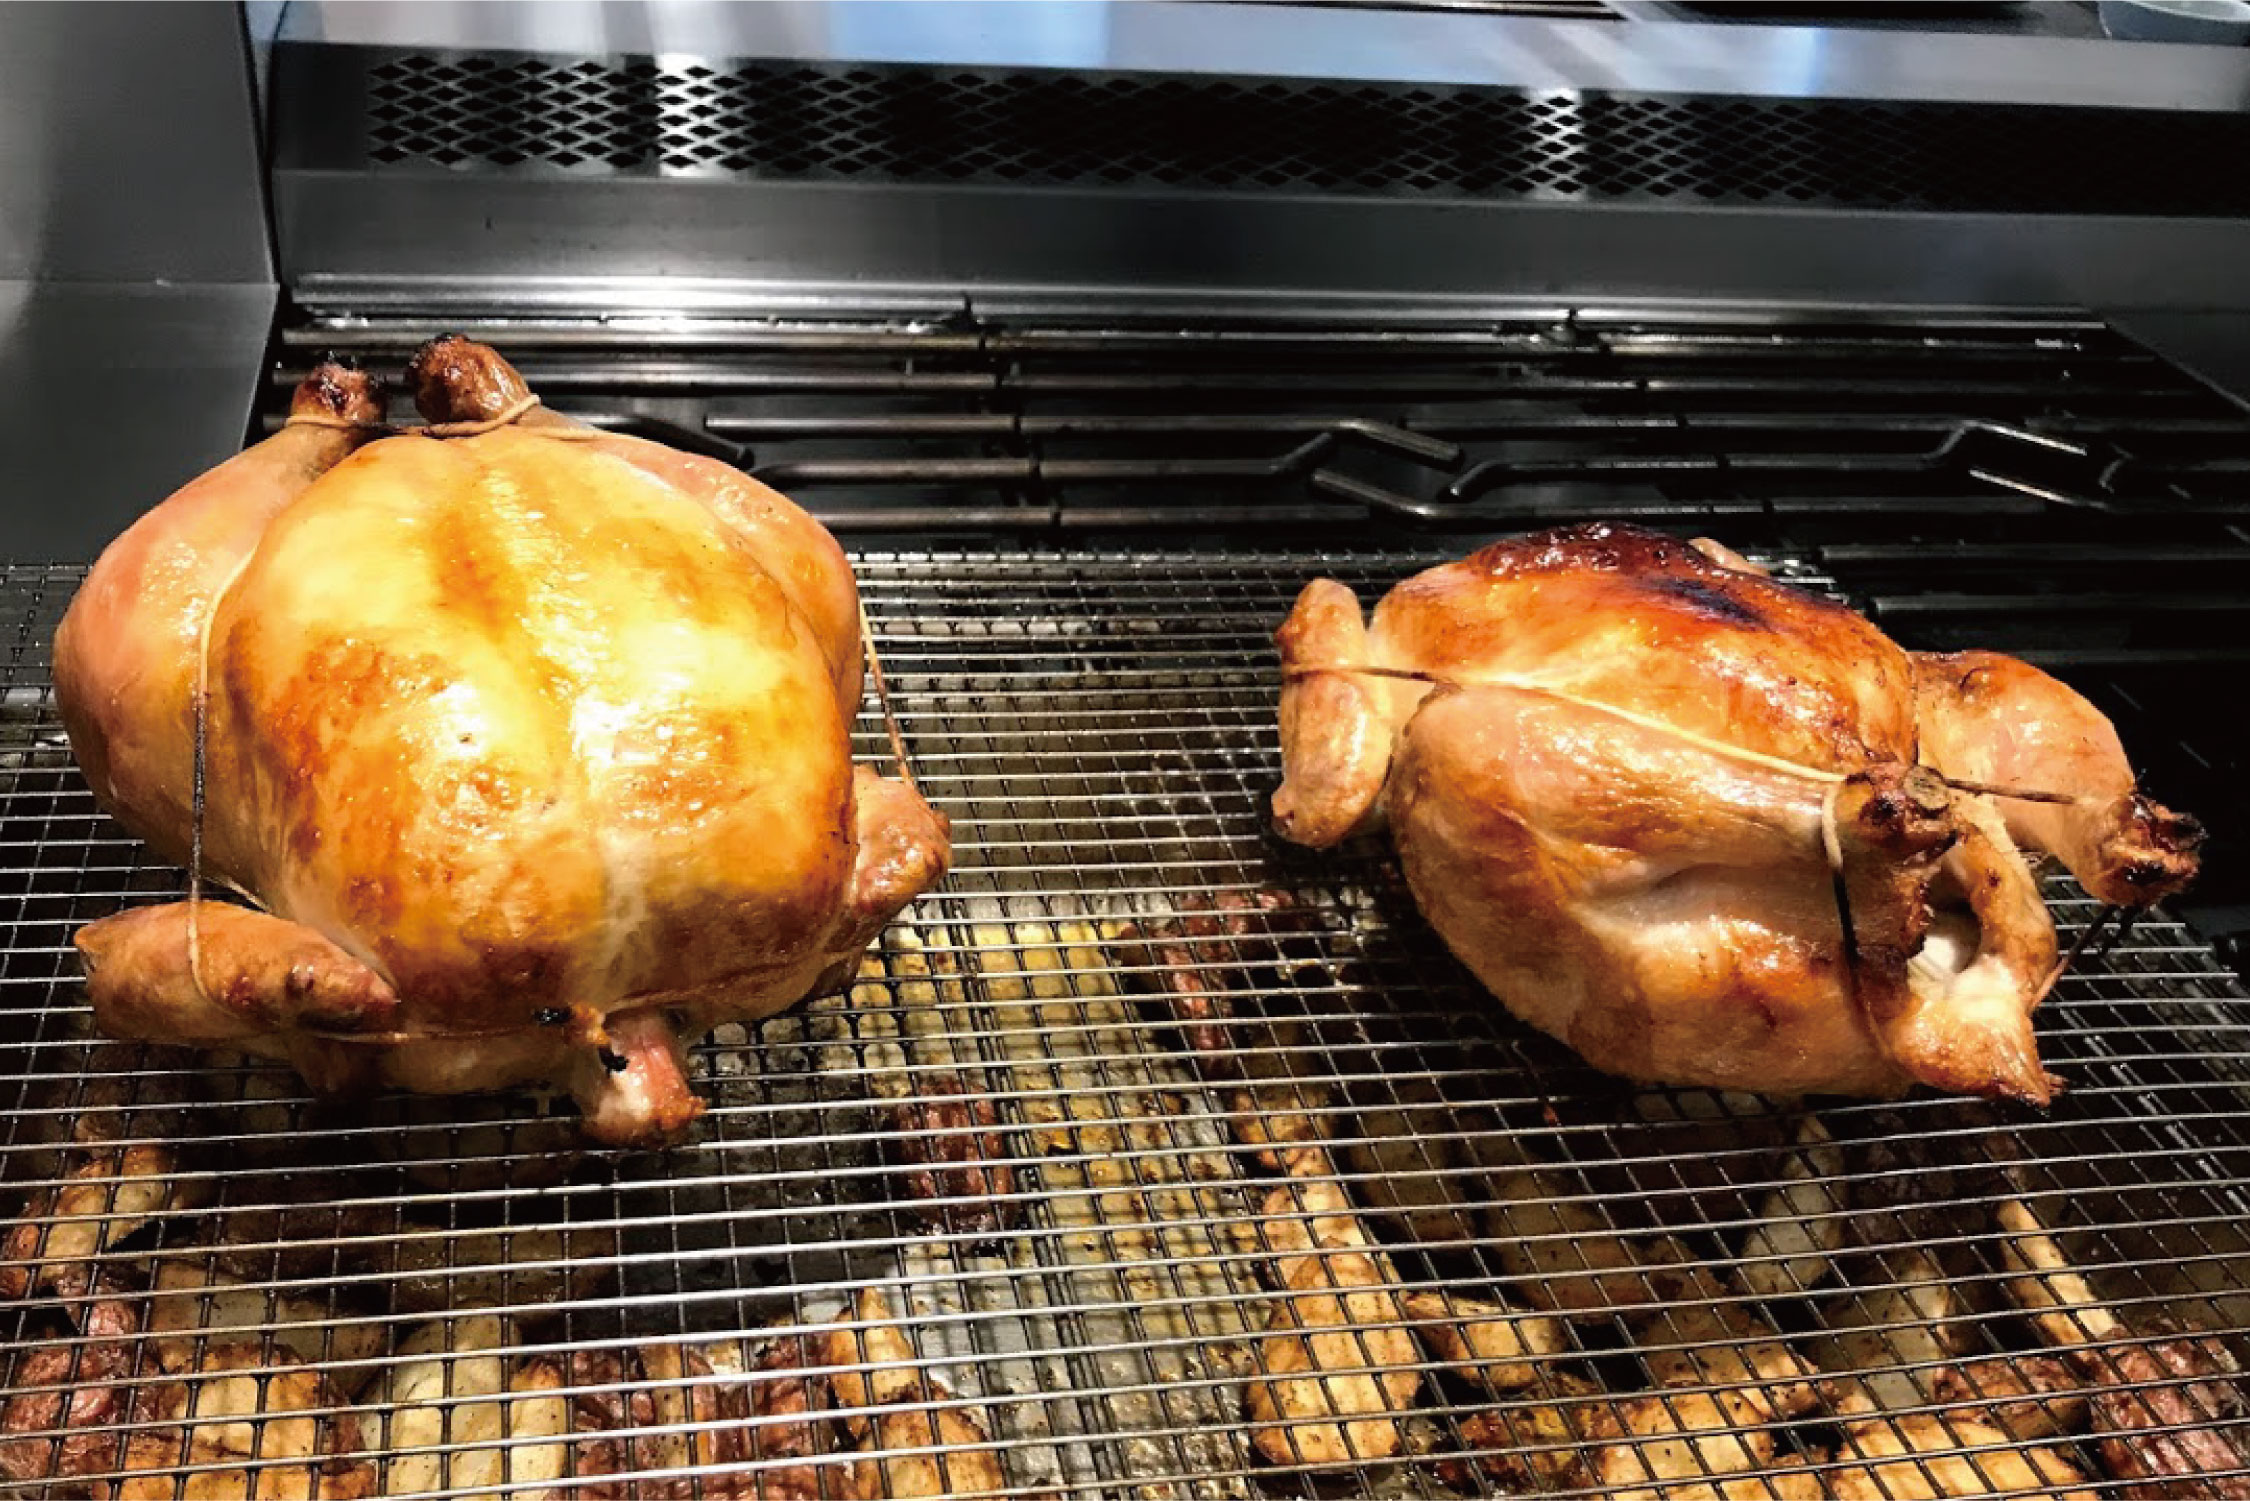 A whole chicken brined with TREHA (left) showed a juicy, evenly browned surface compared to one without TREHA (right).